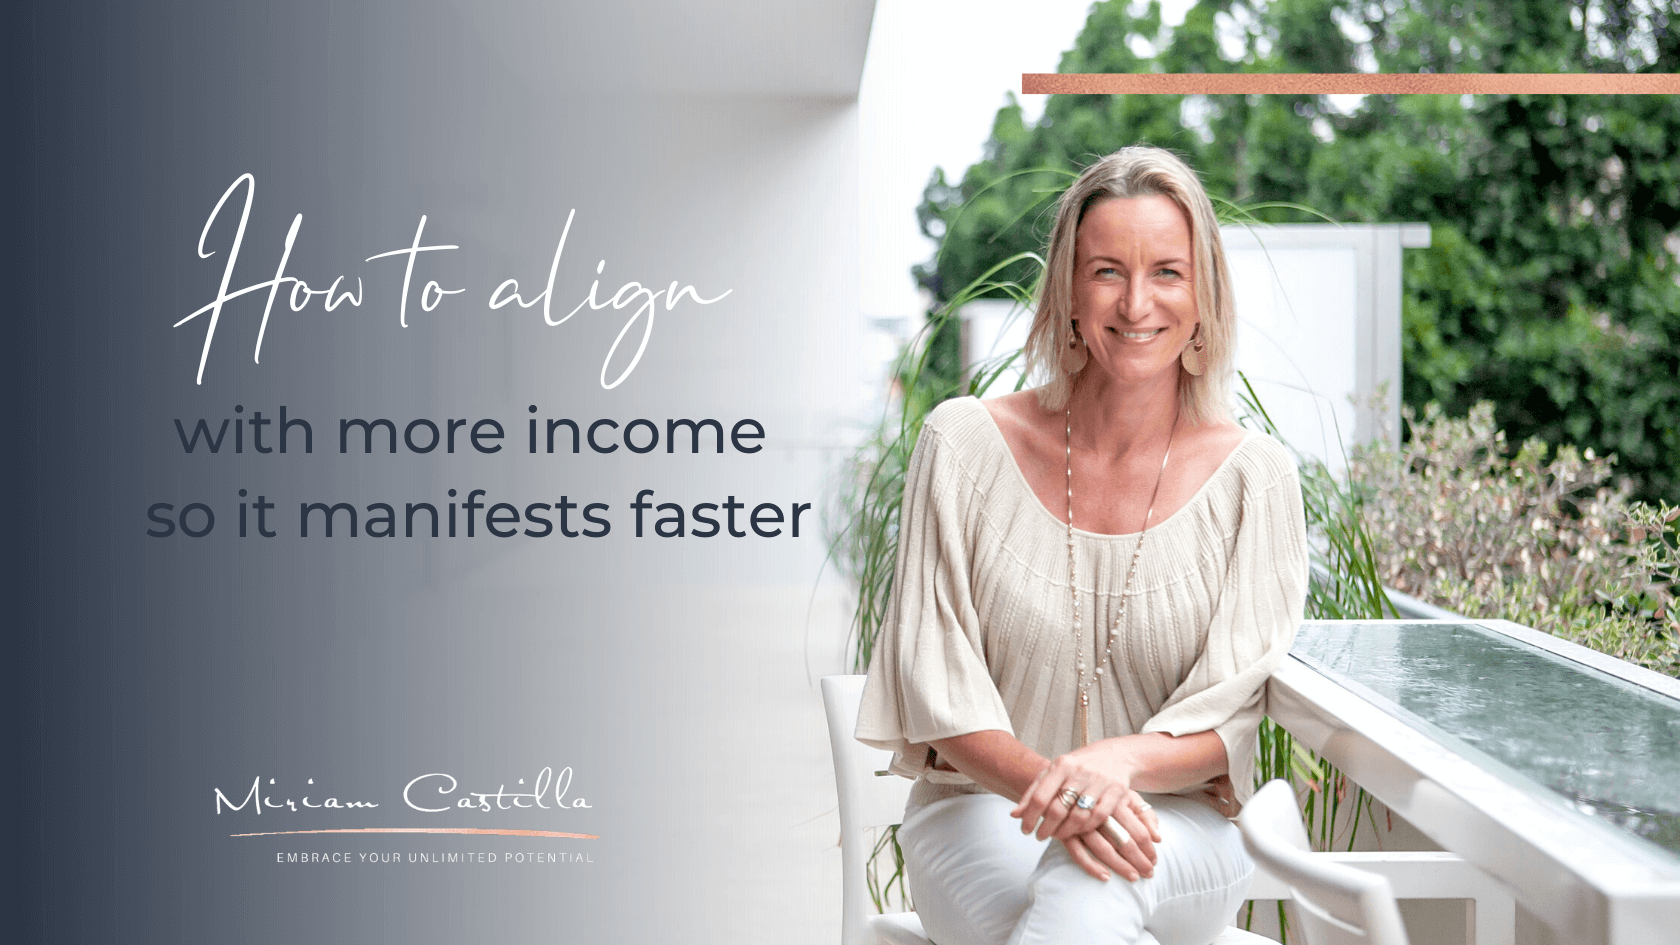 081_align with more income image